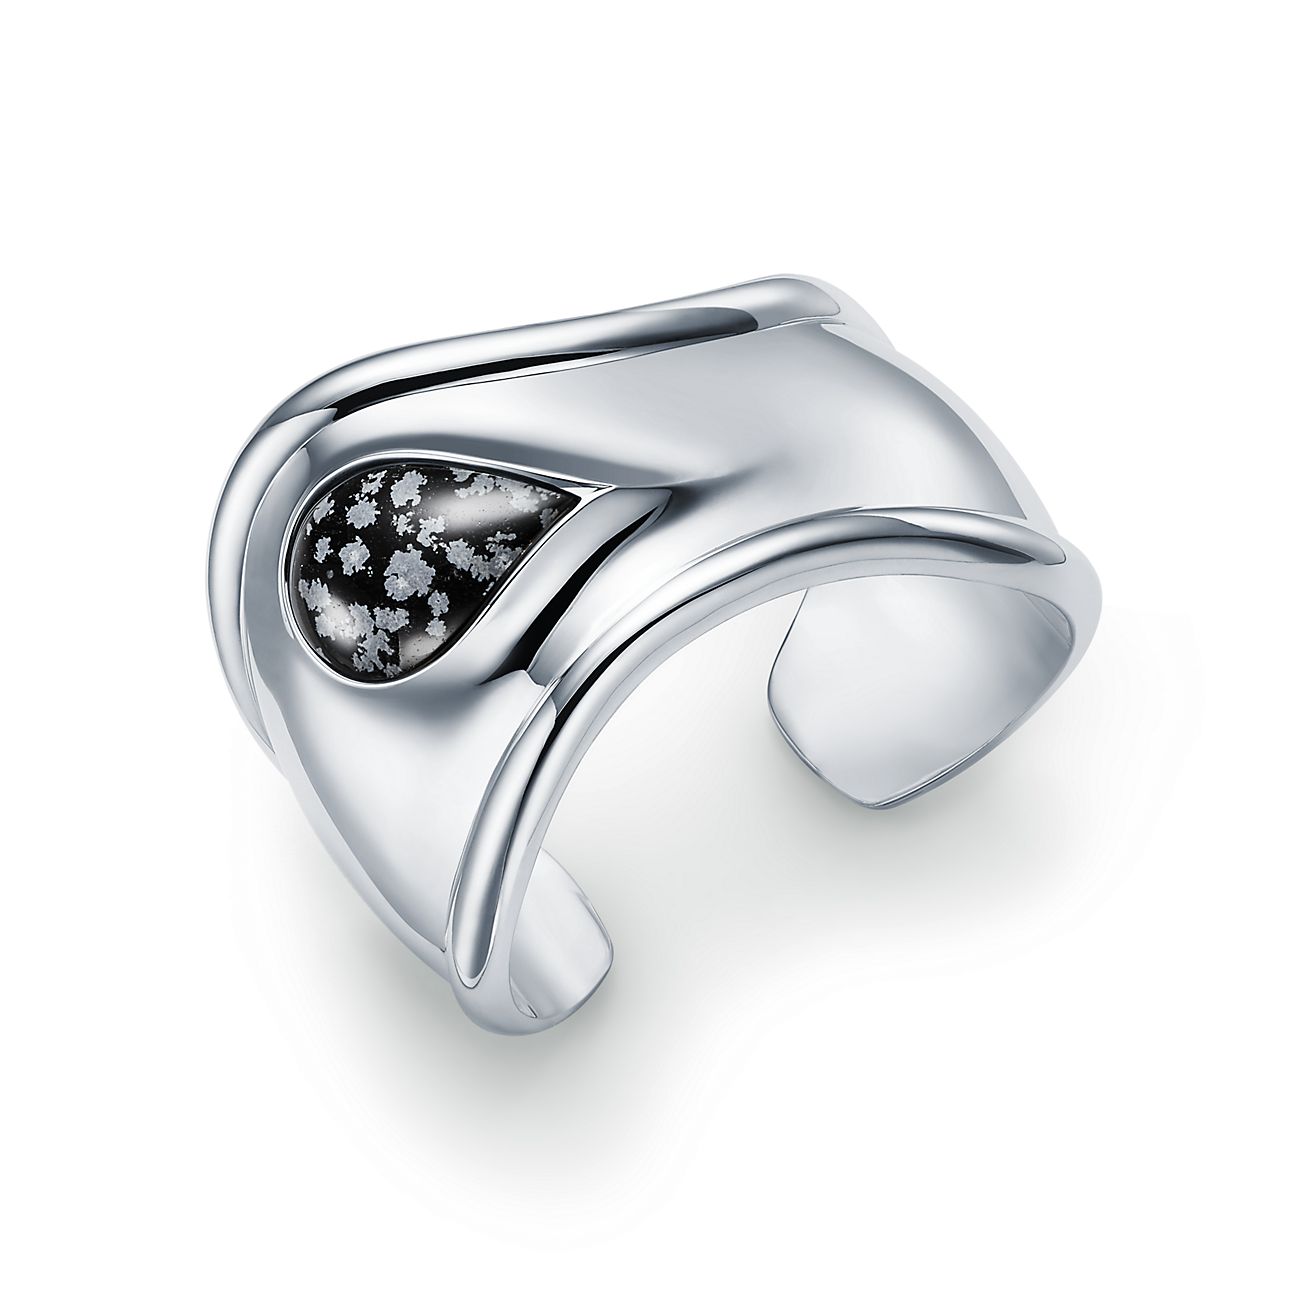 Tiffany & Co. Sterling Silver Scarf Ring In Bone Like Sections